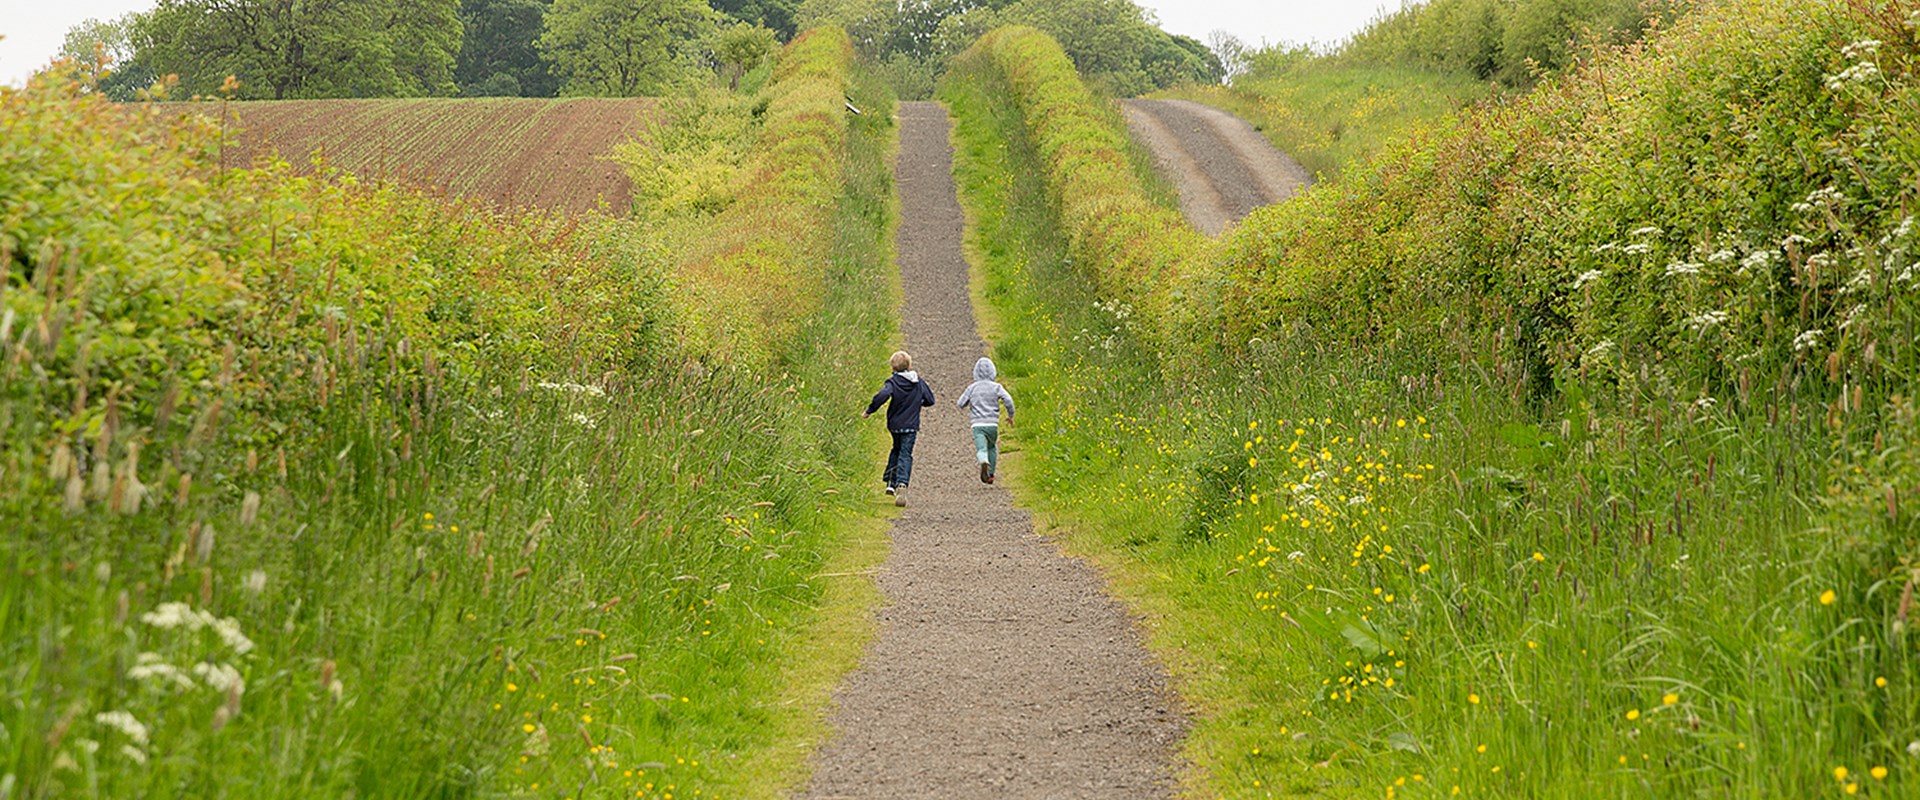 Two children run down a hedge-lined path